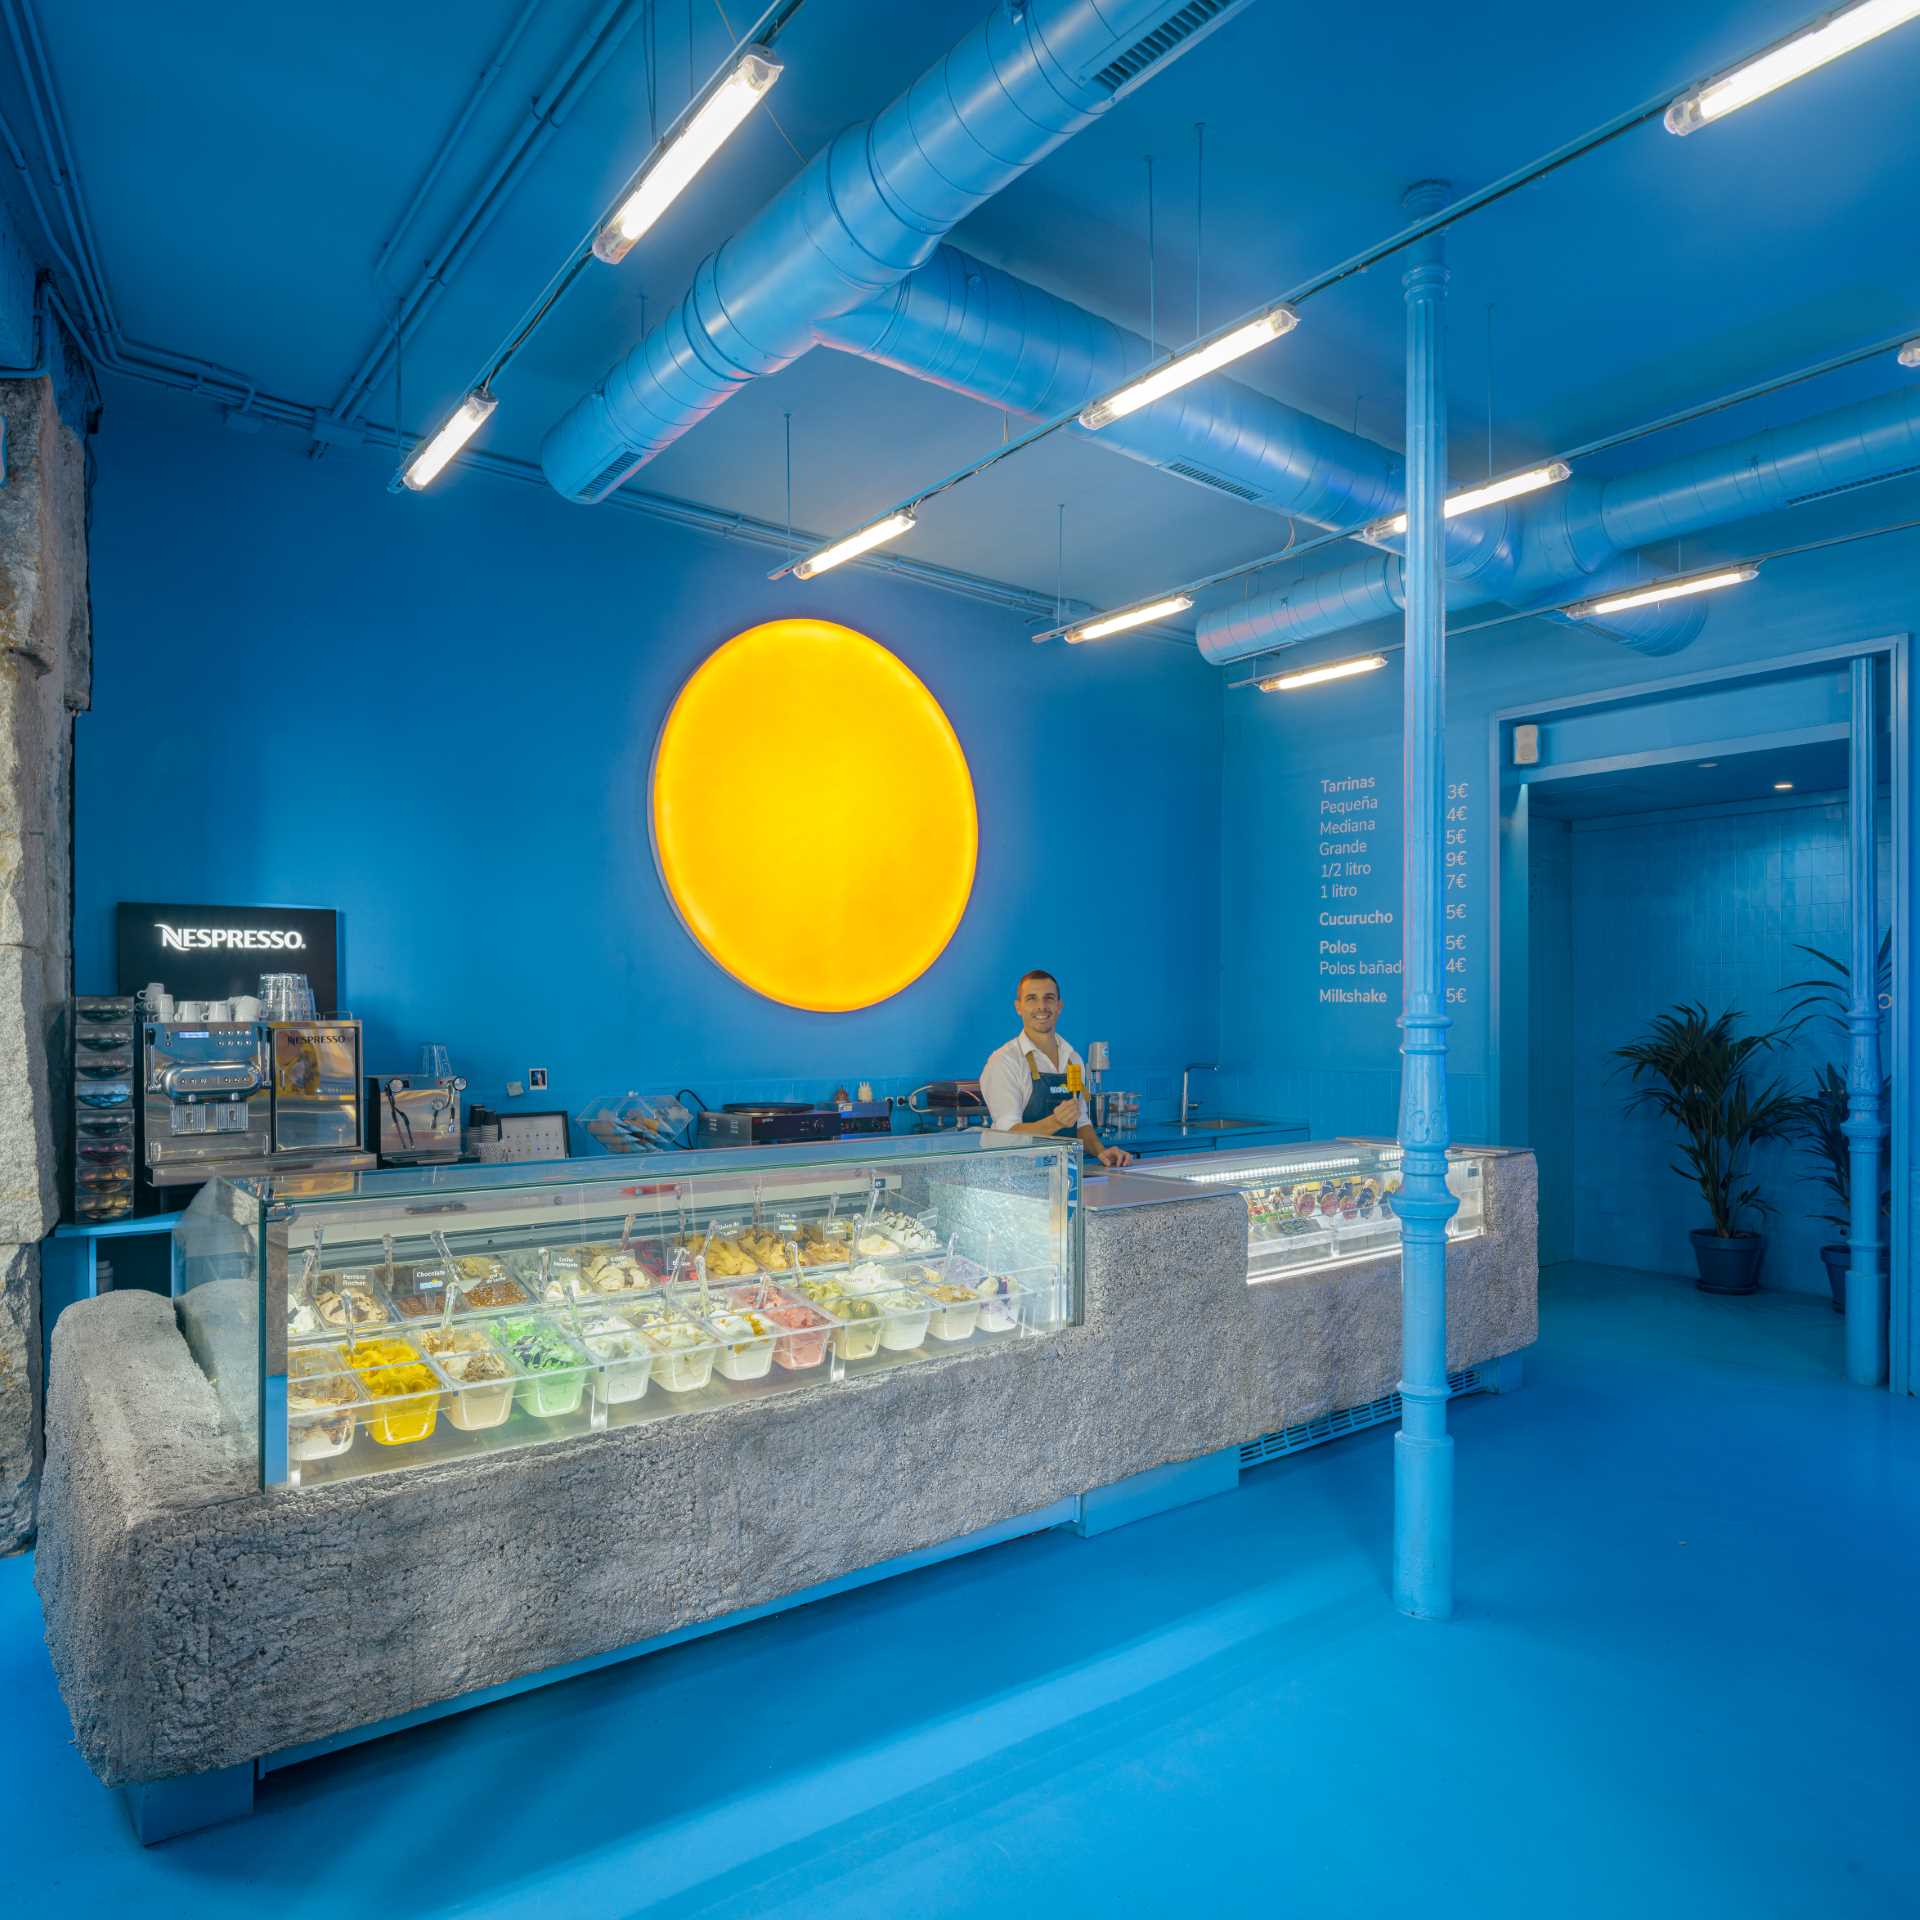 Named 'BRANDO', this modern ice cream shop has a bold and bright blue interior that creates a fun and vibrant atmosphere.